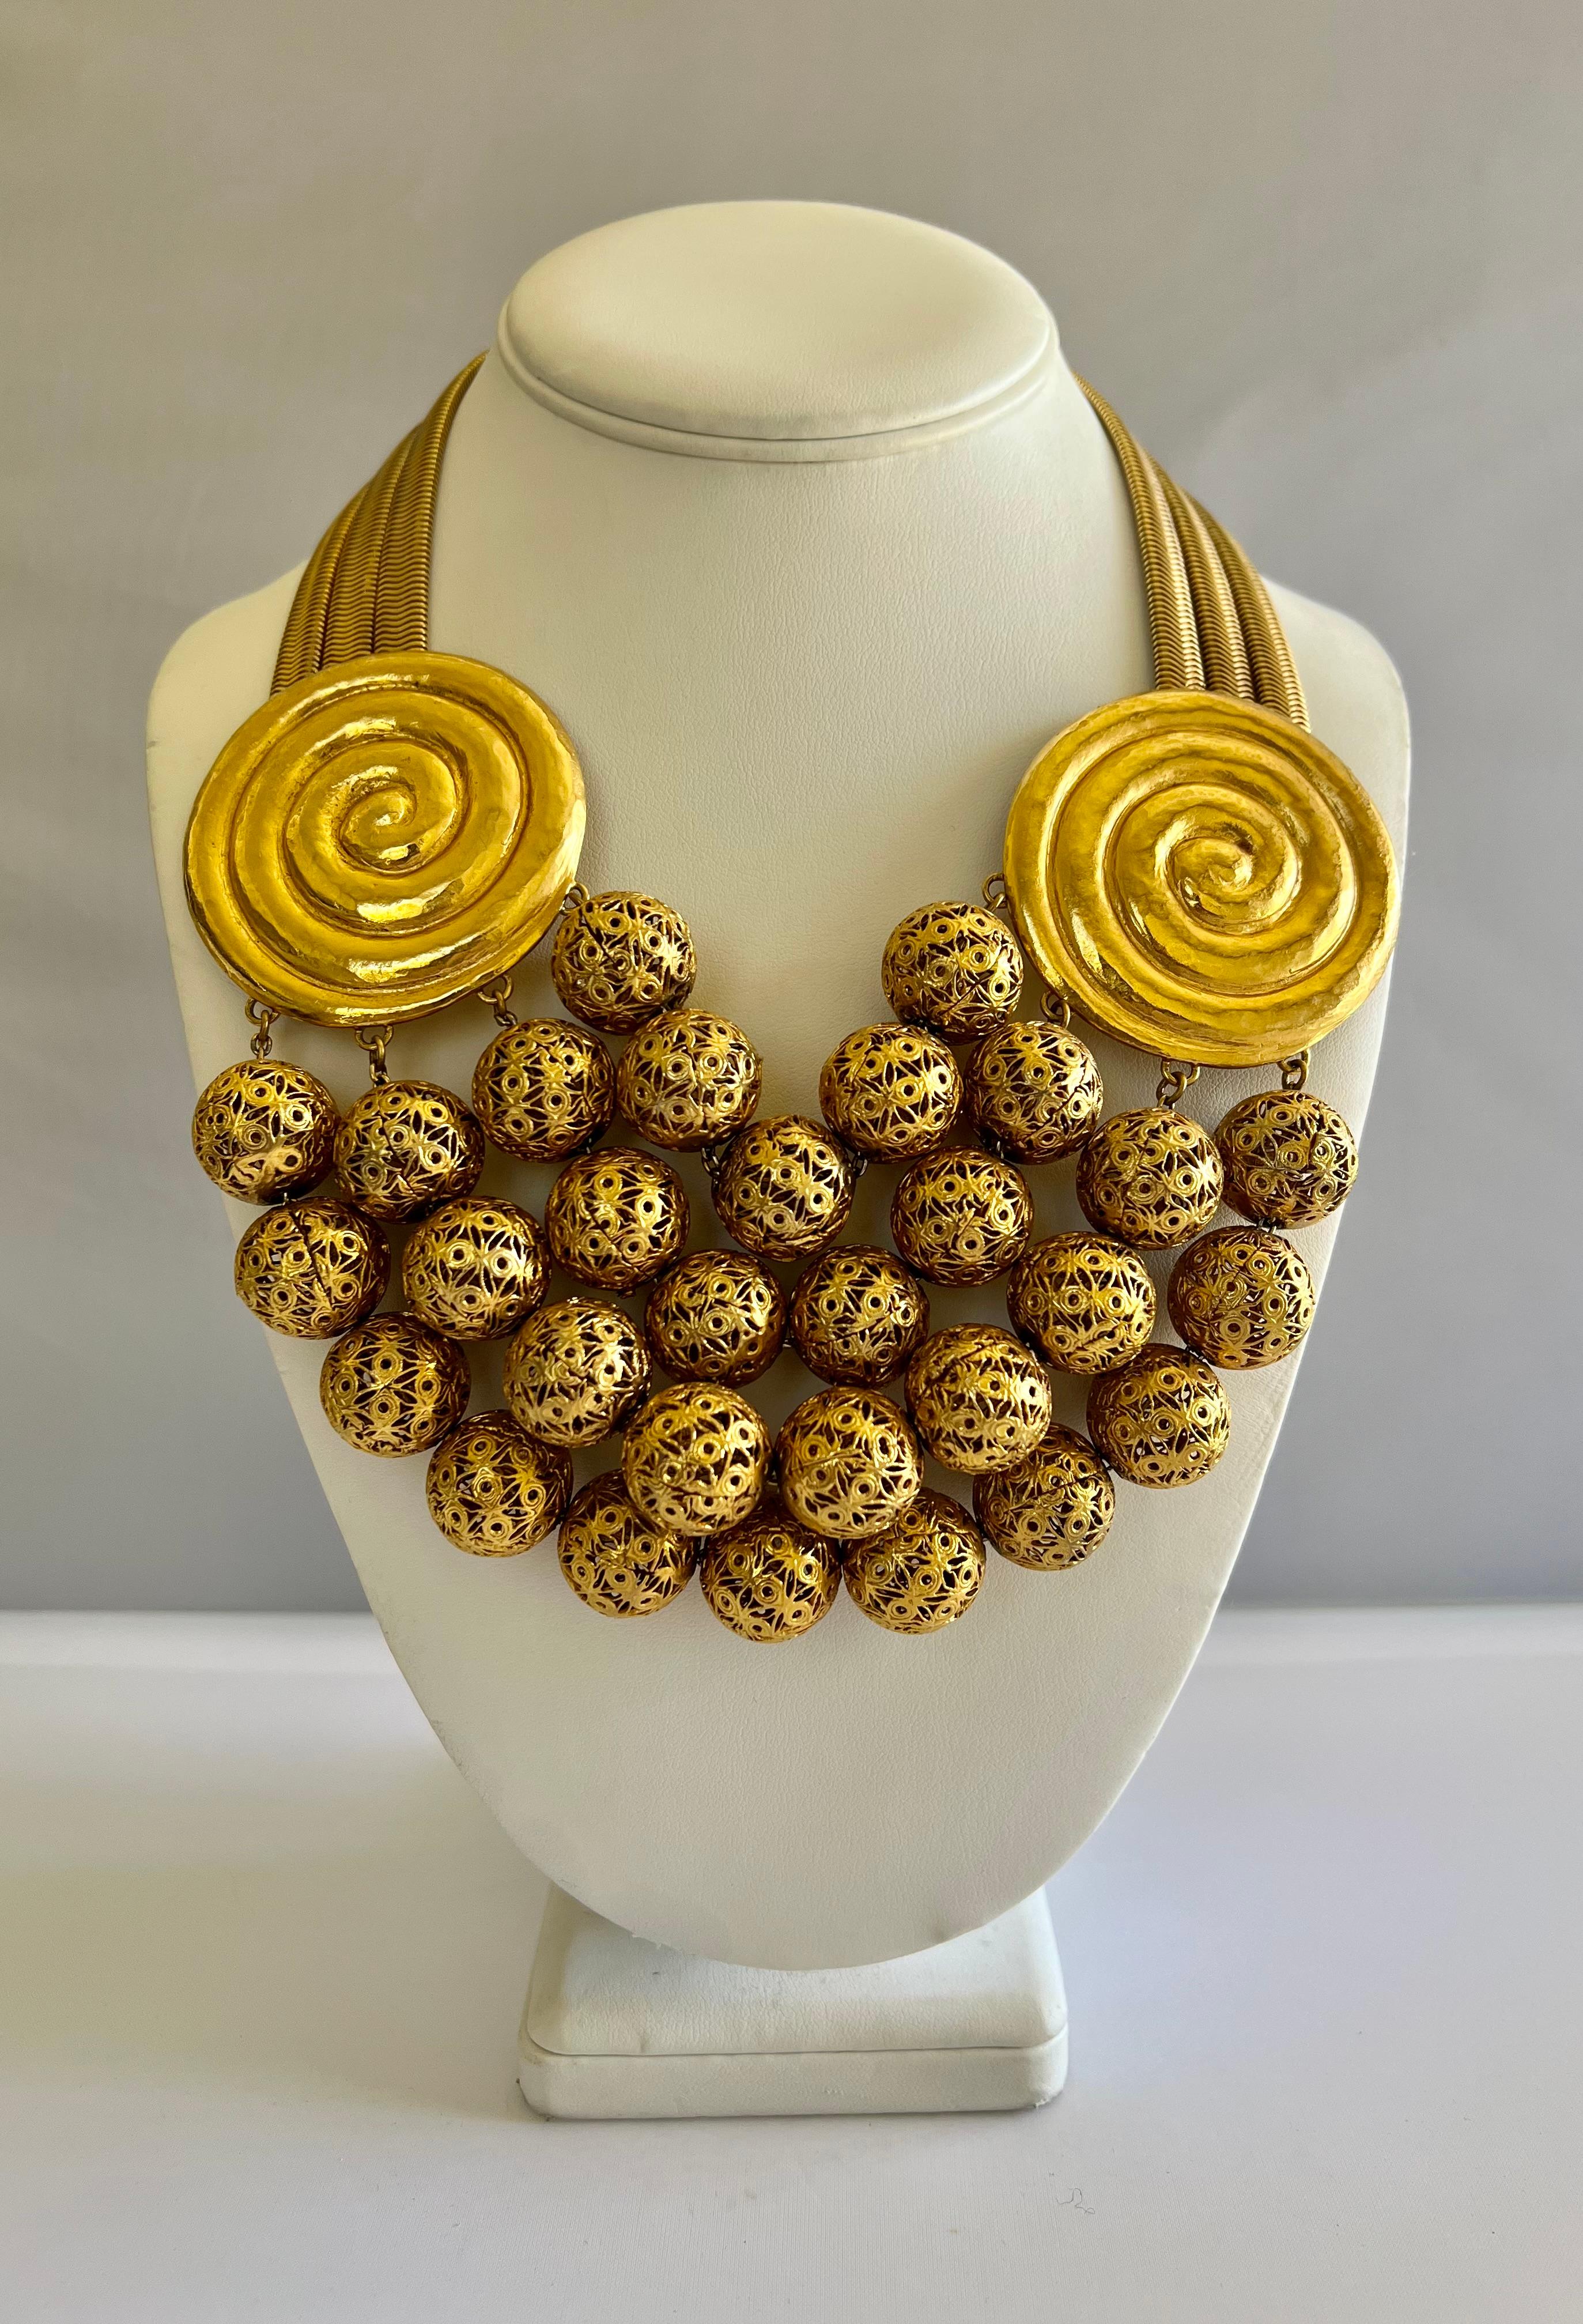 Scarce vintage gilt, Rochas Paris statement necklace circa the 1940s-1950s. This special ornate necklace was designed by Max Boinet and executed by Mr. Robert Goossens for Rochas, comprised out of gilt metal the statement necklace features romantic